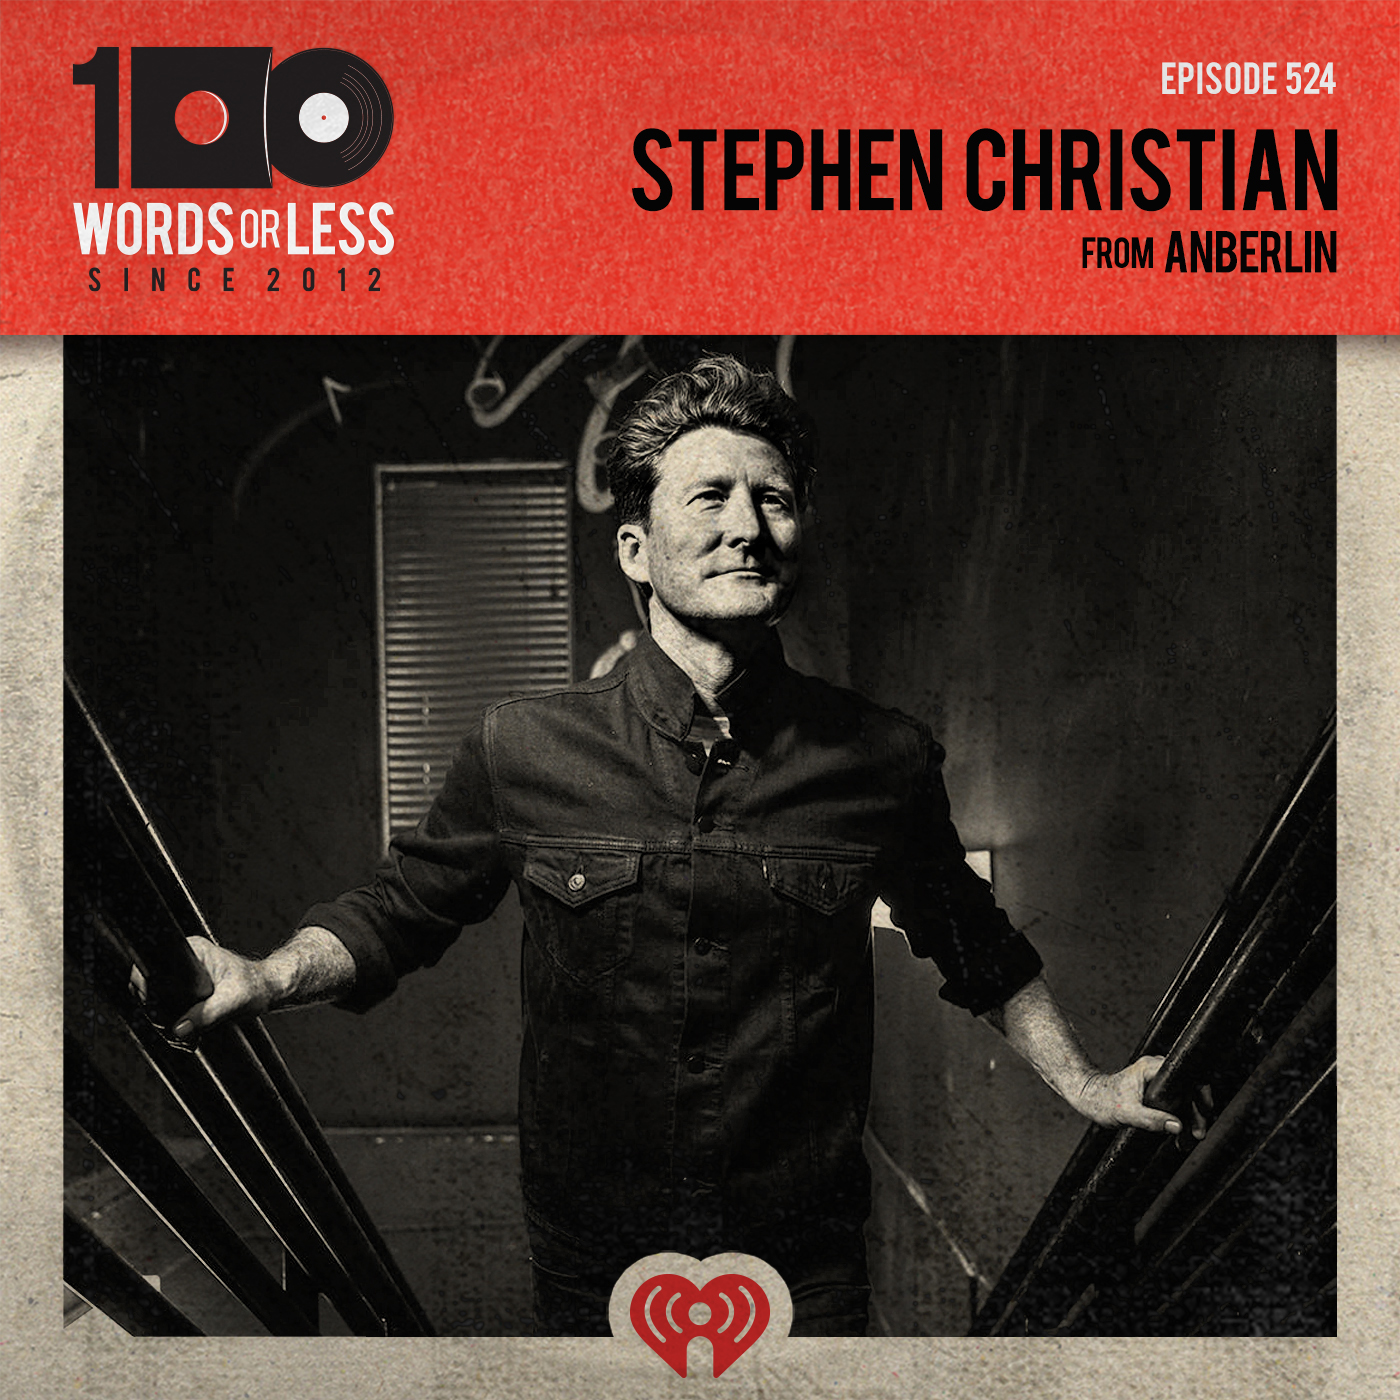 Stephen Christian from Anberlin